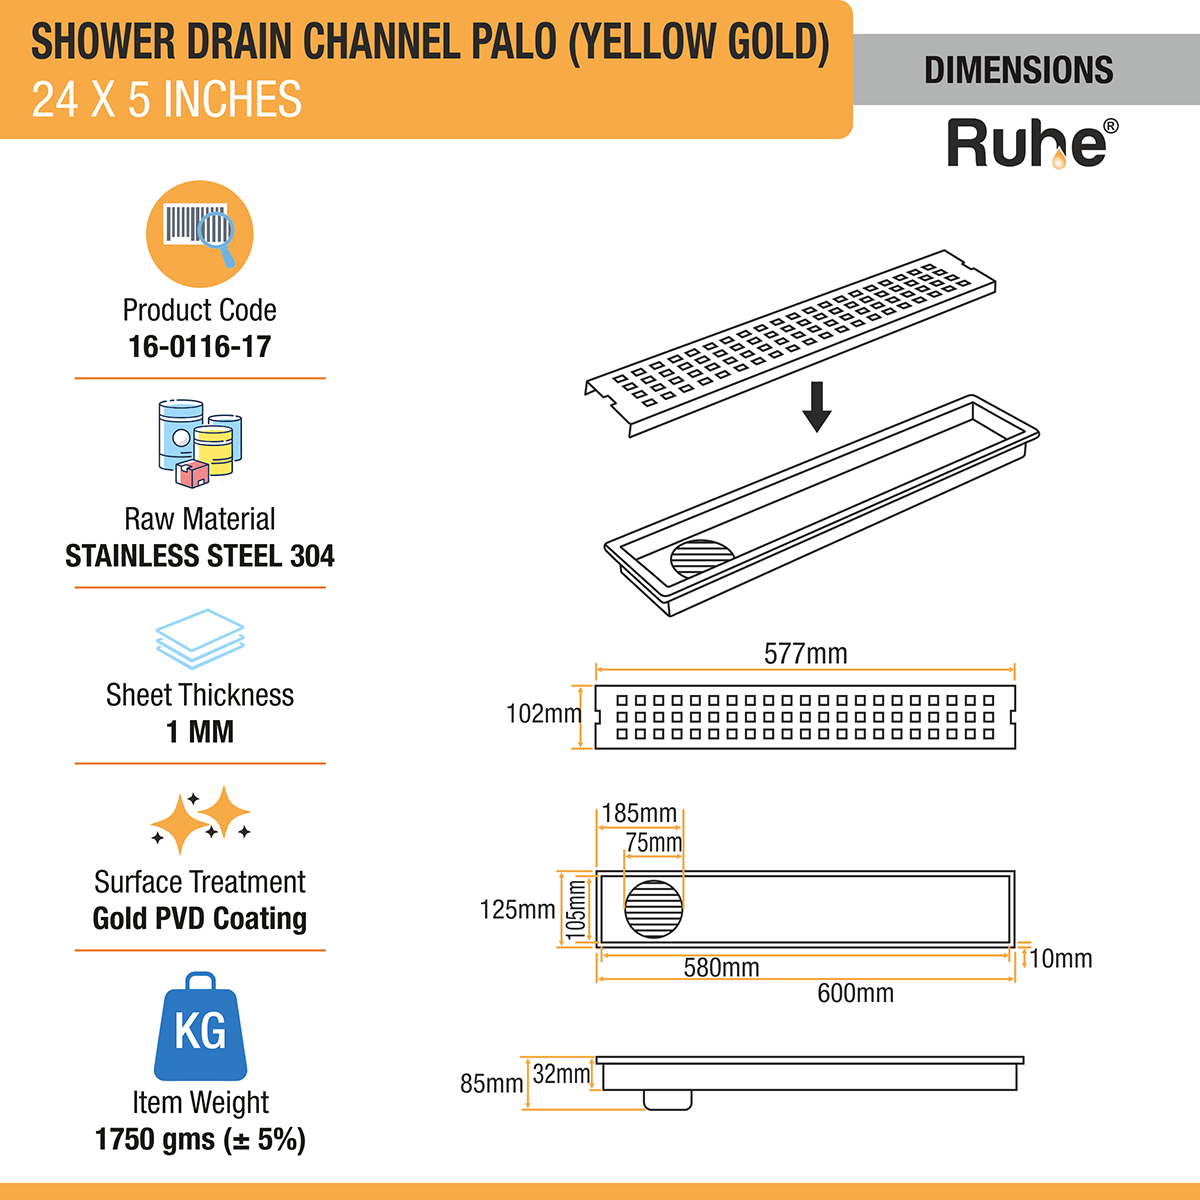 Palo Shower Drain Channel (24 x 5 Inches) YELLOW GOLD dimensions and size